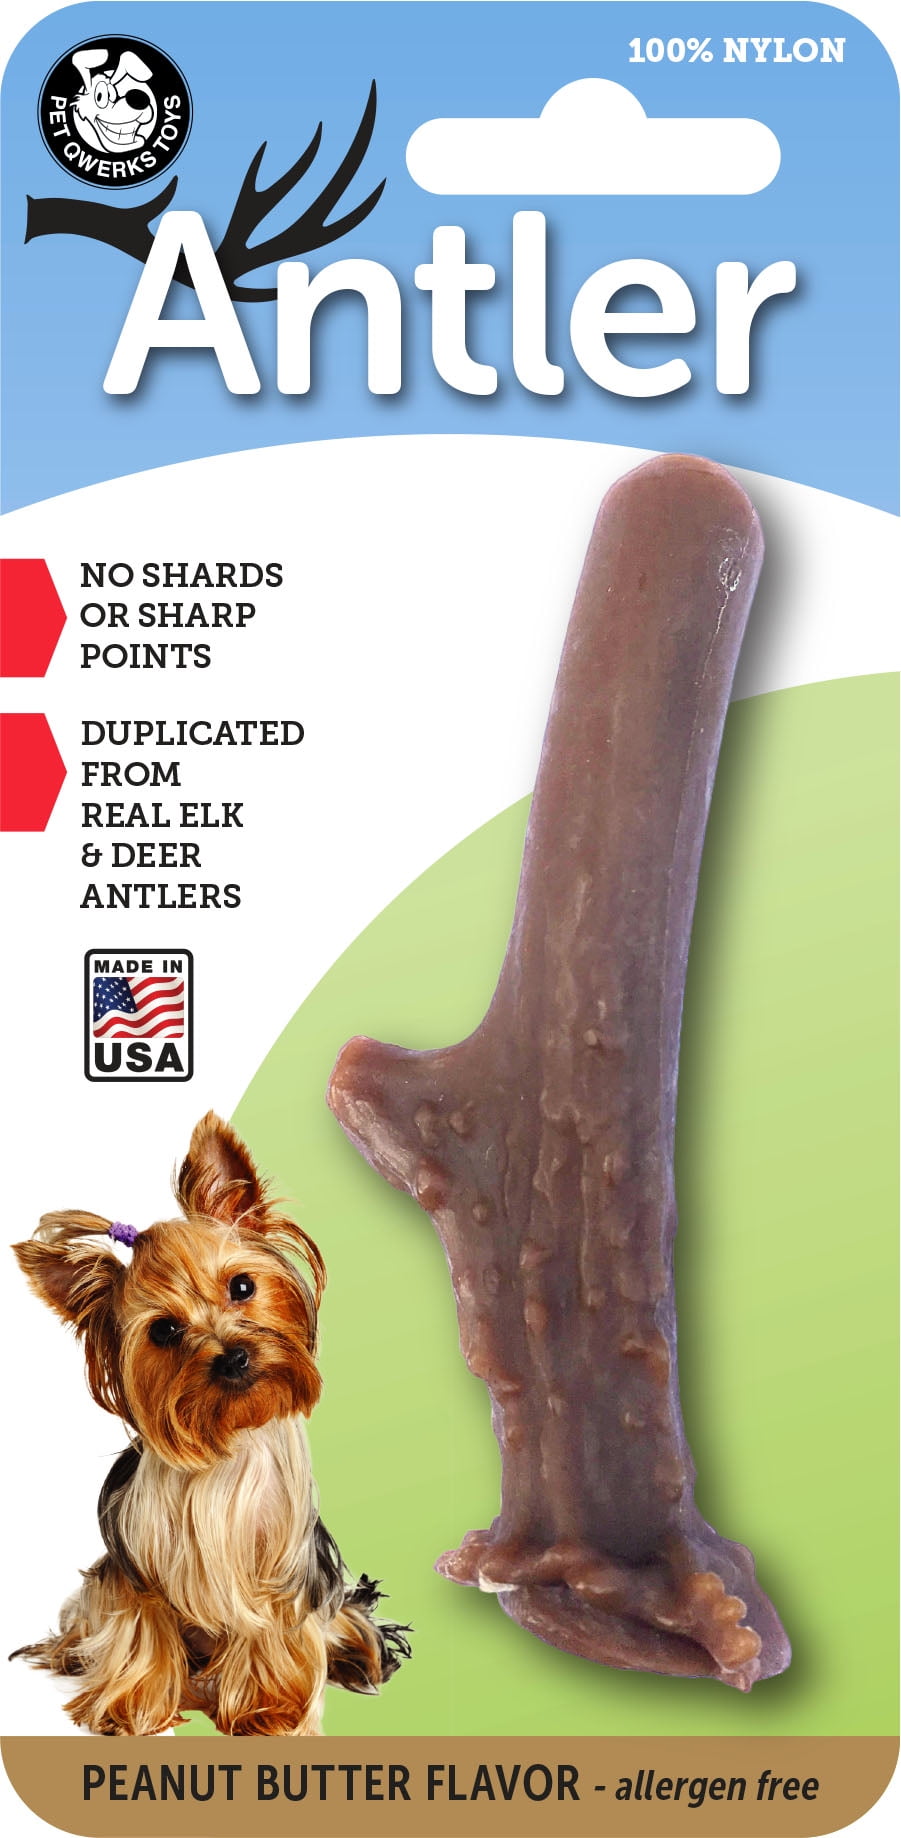 100% Premium Nylon Tough Nylon Bones for Power Chewers Pet Qwerks Flavor Farms Chew Toys Made in USA Multi Pack Allergen Free 